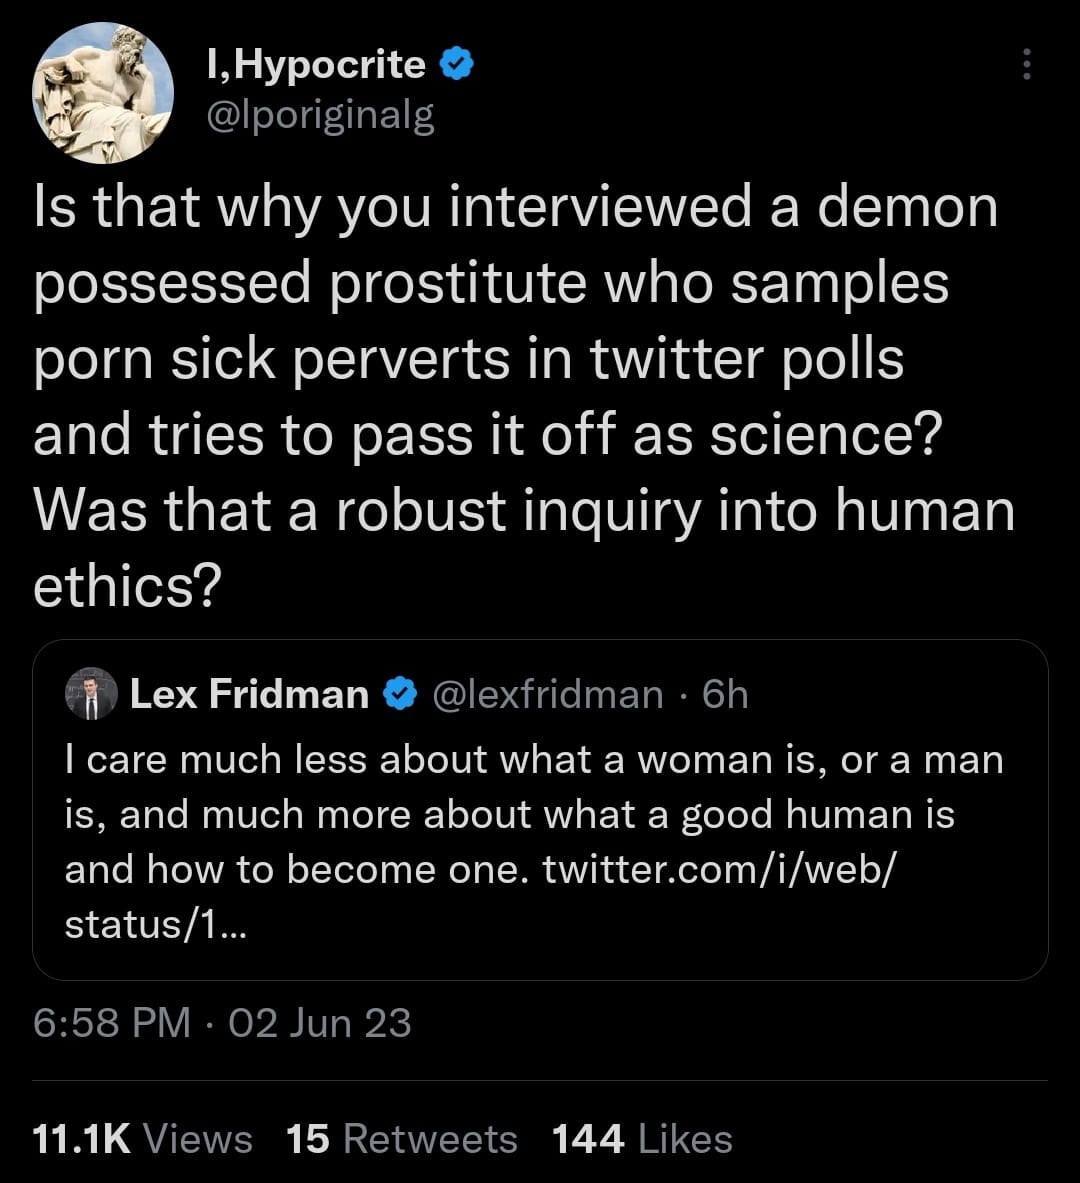 May be an image of text that says 'I,Hypocrite @lporiginalg Is that why you interviewed a demon possessed prostitute who samples porn sick perverts in twitter polls and tries to pass it off as science? Was that a robust inquiry into human ethics? Lex Fridman @lexfridman 6h care much less about what a woman is, or a man is. and much more about what a good human is and how to become one. twitter.com/i/web/ status/1... 6:58 PM 02 Jun 23 11.1K Views 15 Retweets 144 Likes'